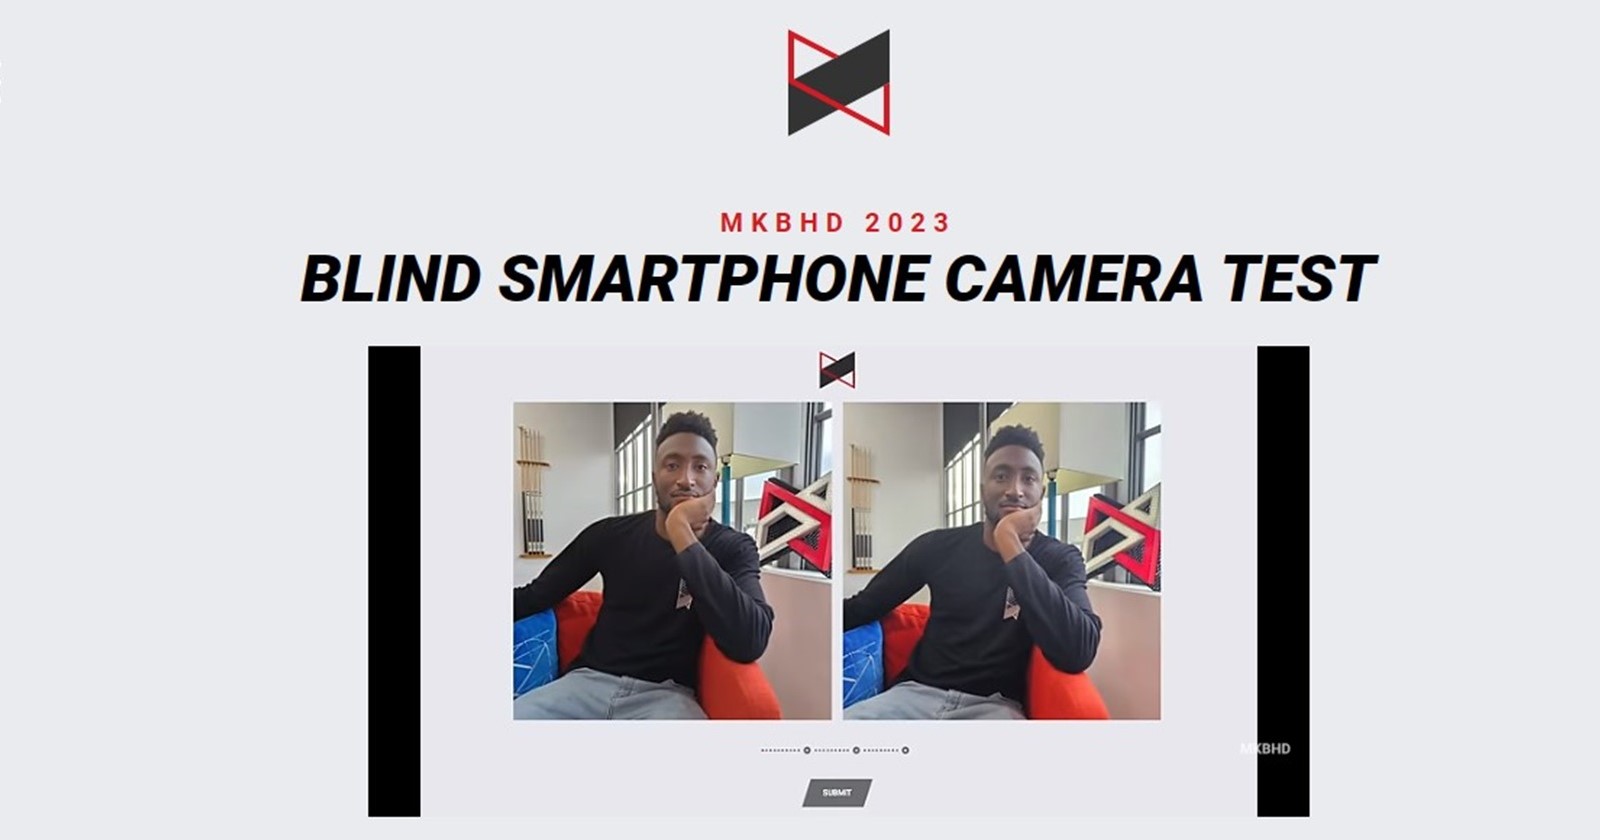 Google Pixel phones dominate MKBHD's early Blind Smartphone Camera Test 2023 results